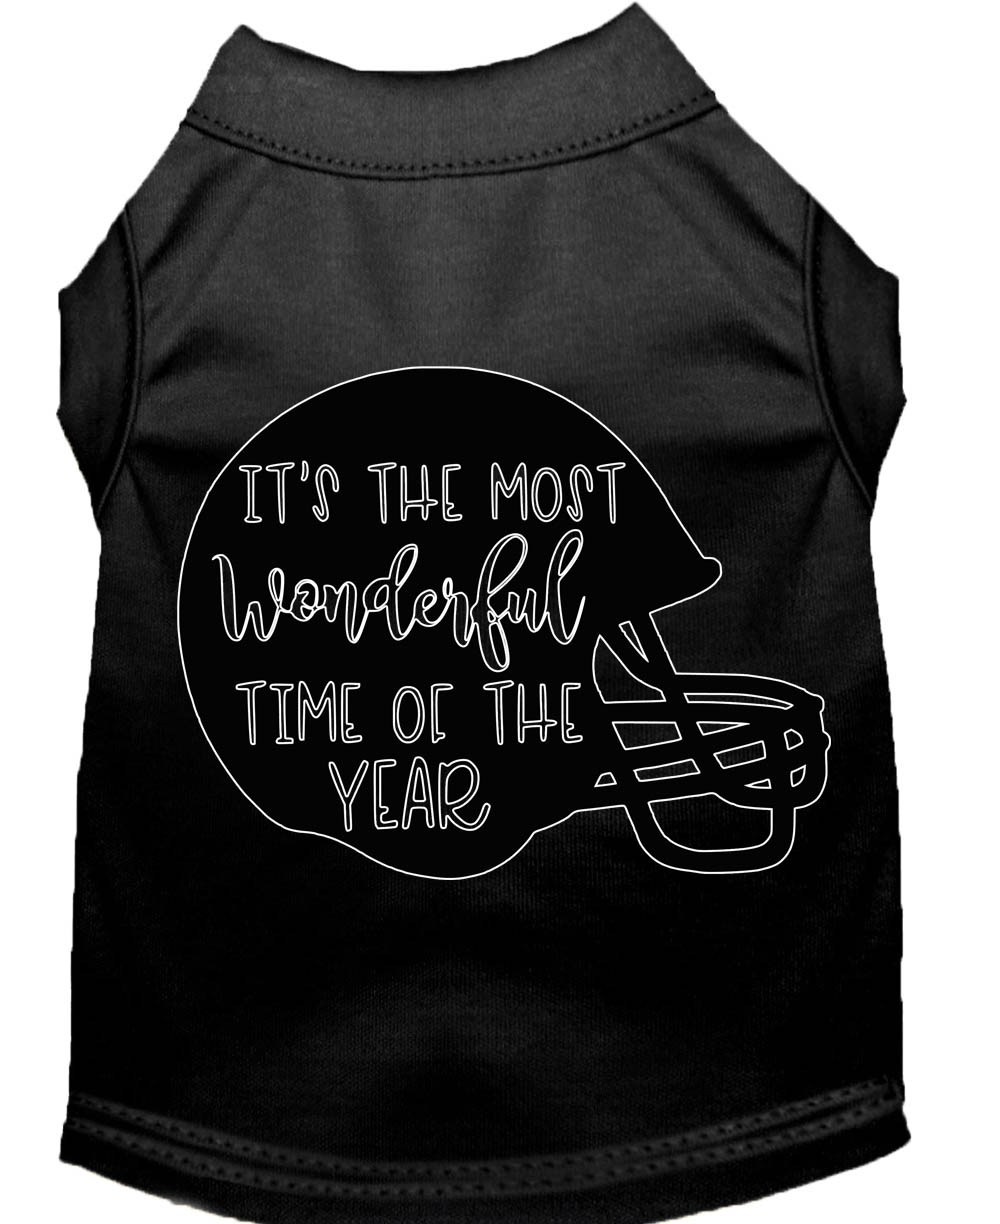 Most Wonderful Time of the Year (Football) Screen Print Dog Shirt Black Med